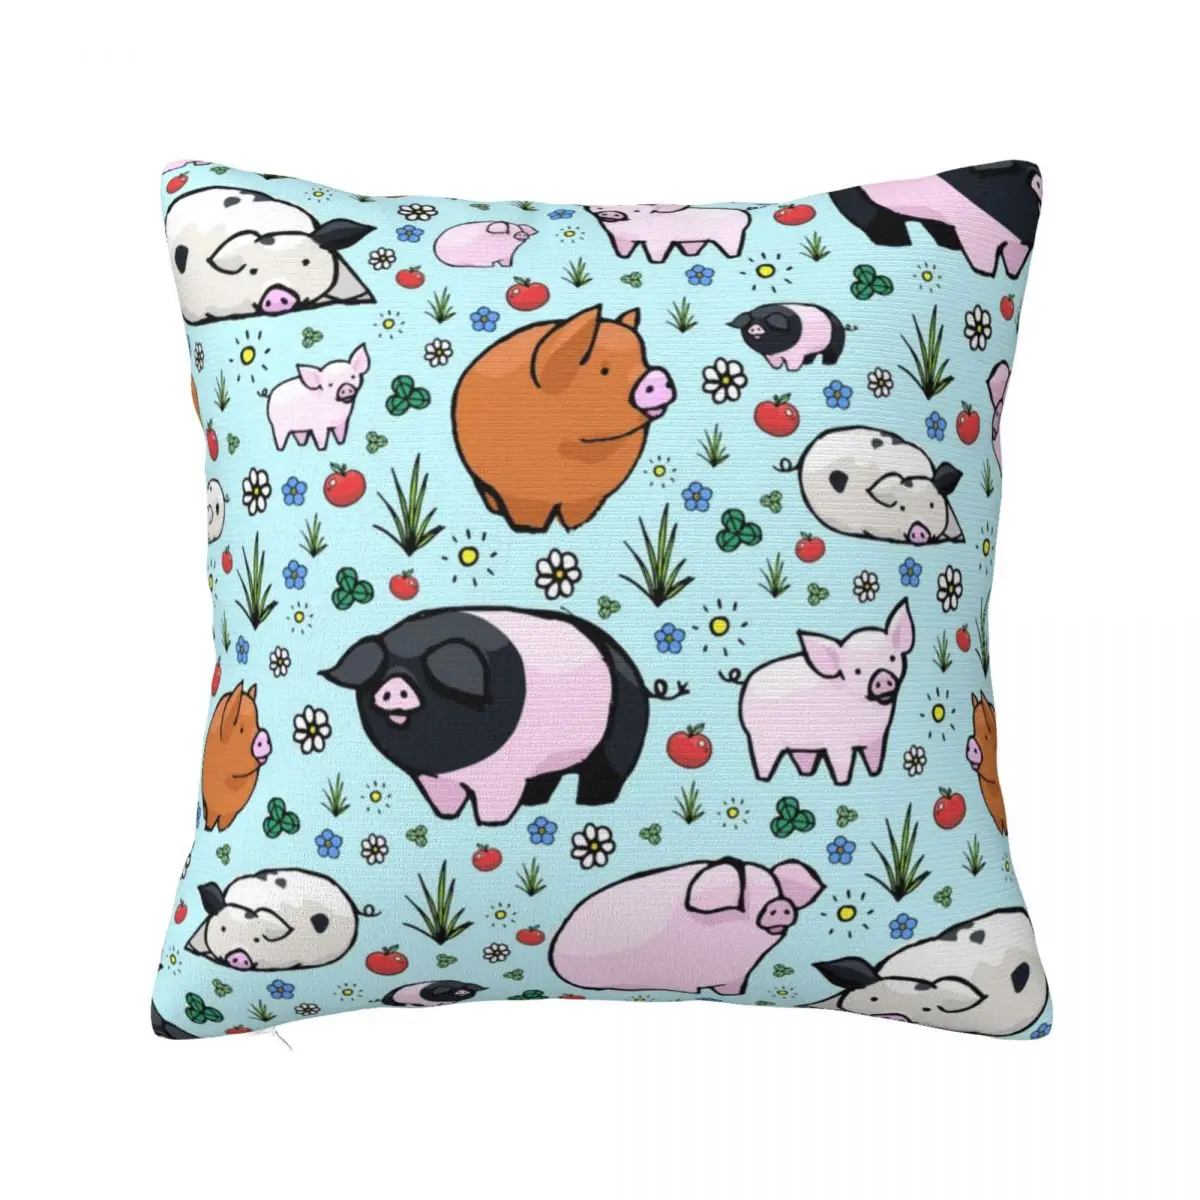 

Cute Pigs Colorful Pillowcase Printing Polyester Cushion Cover Decorations animal nature funny Pillow Case Cover Home 40X40cm